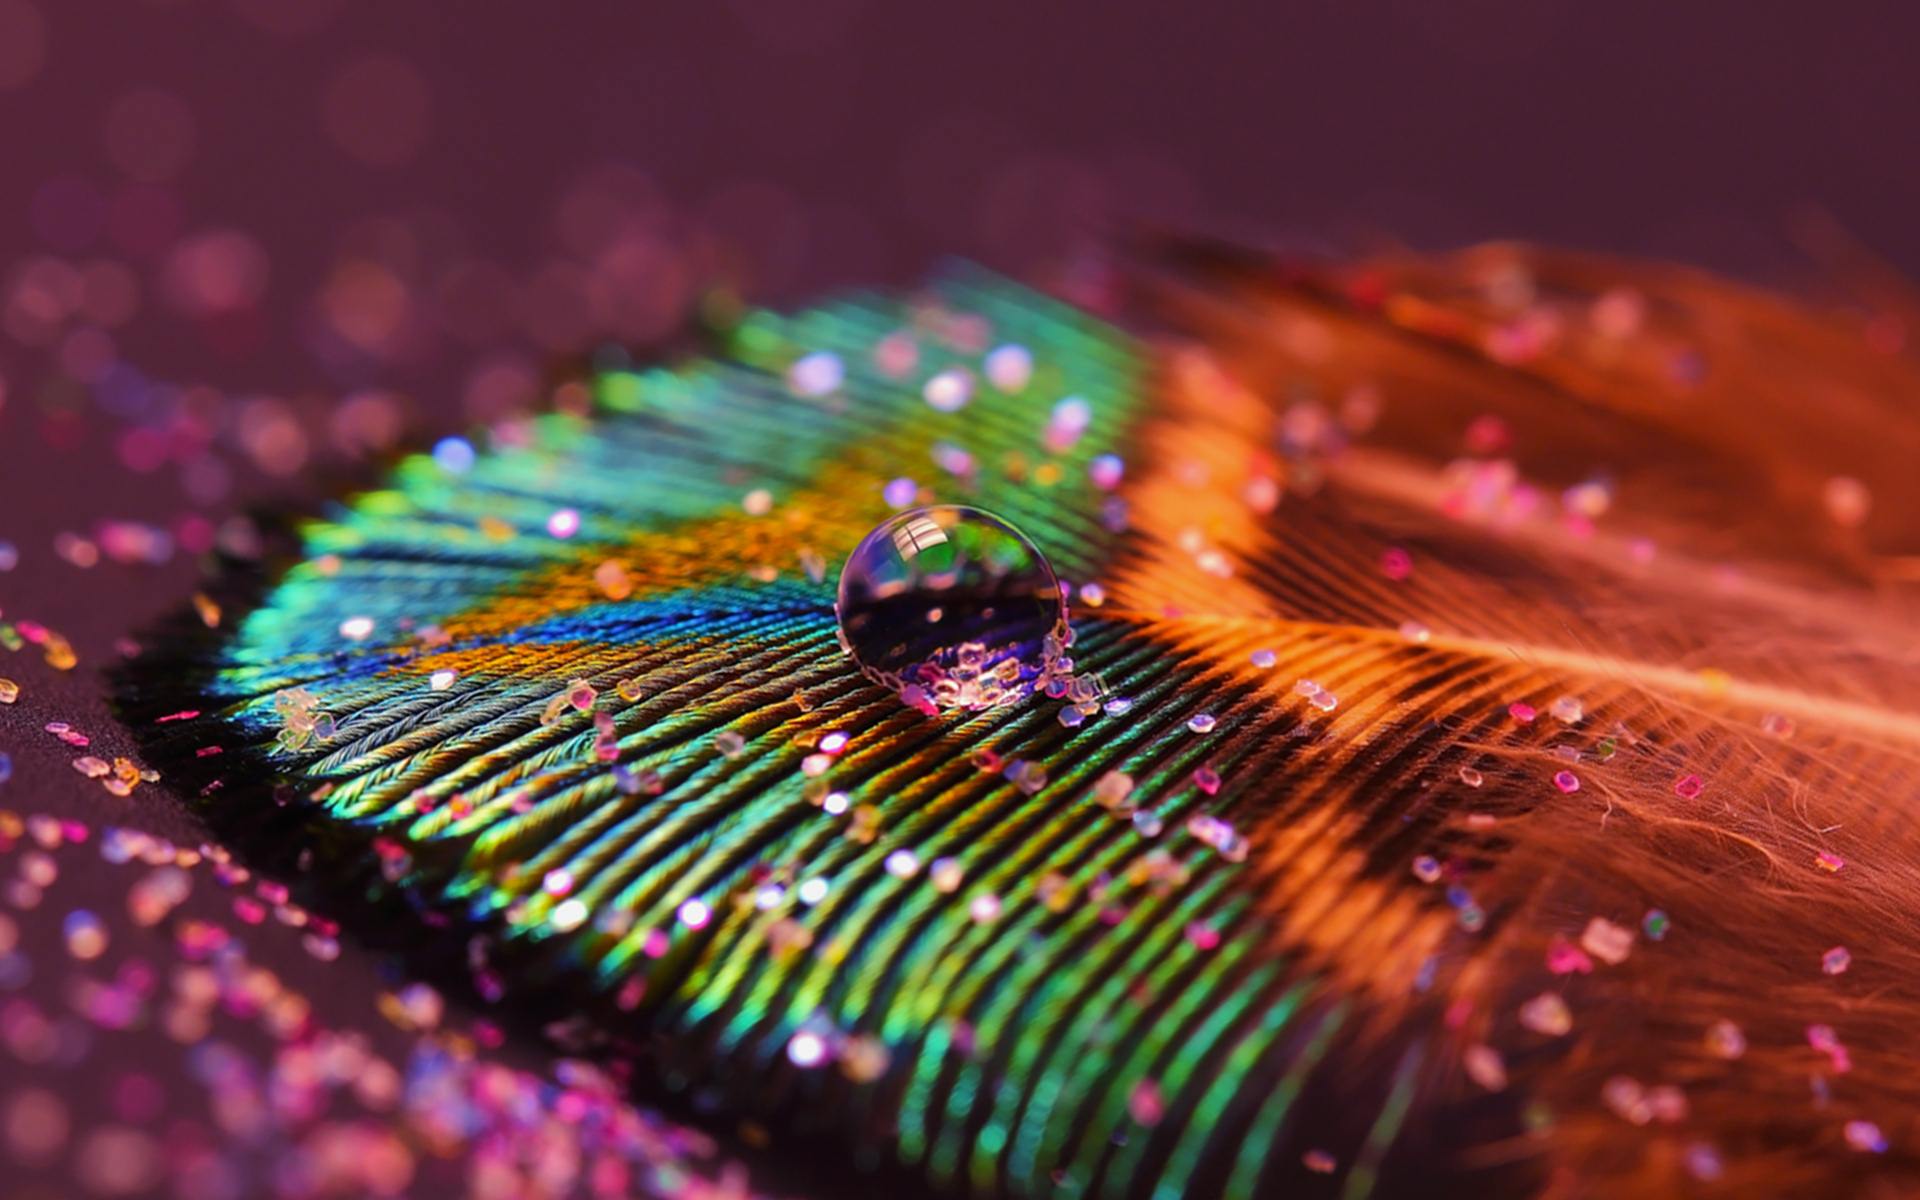 Wallpapers Of Peacock Feathers HD 2015 - Wallpaper Cave